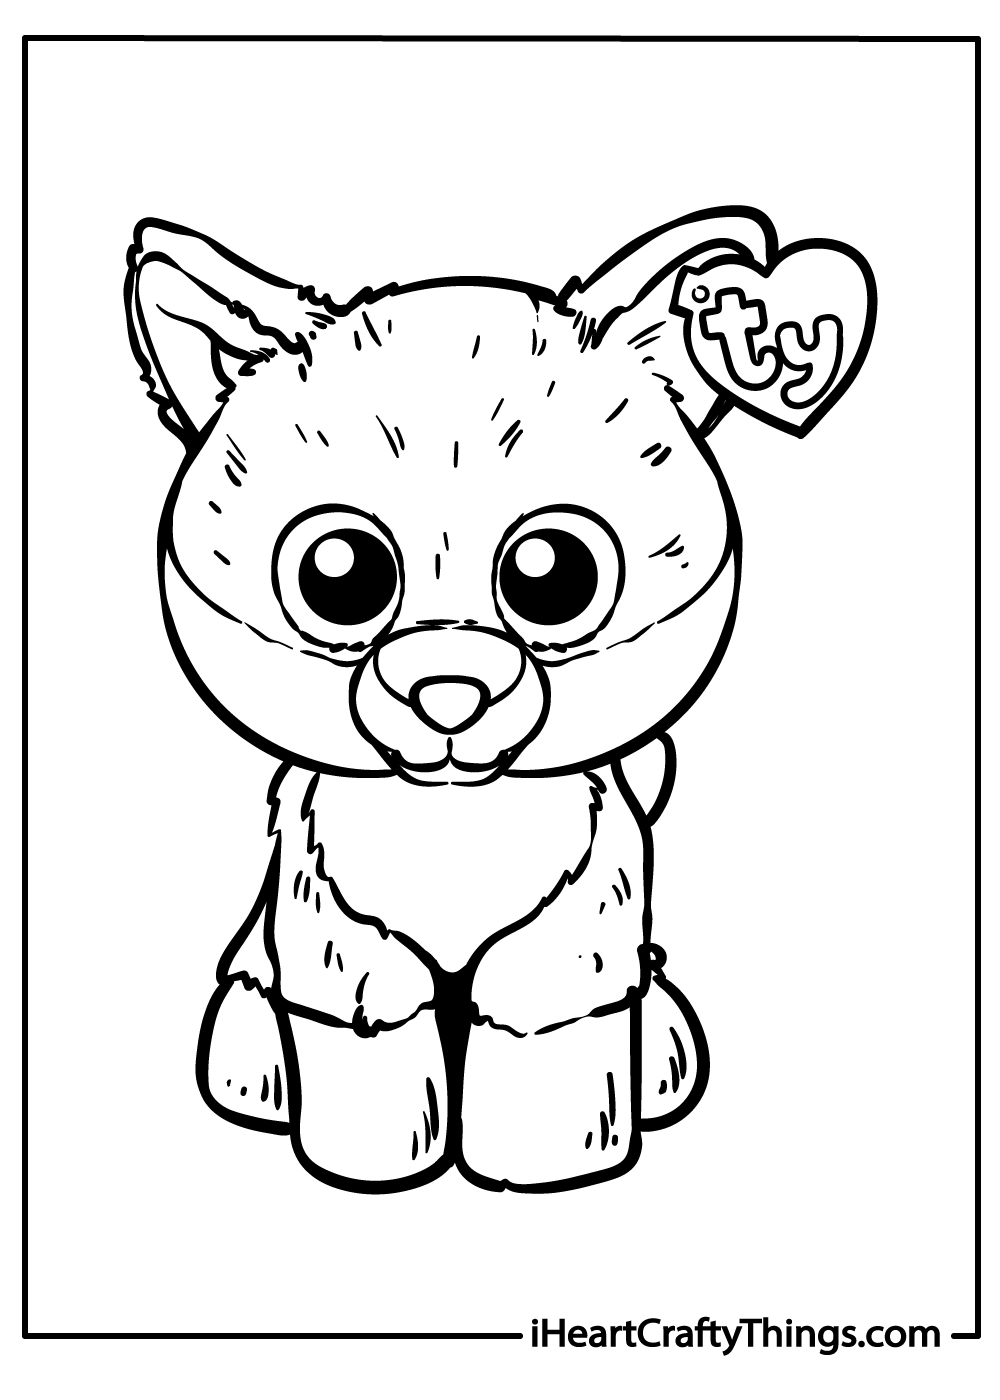 Original Beanie Boos Coloring Pages for Kids